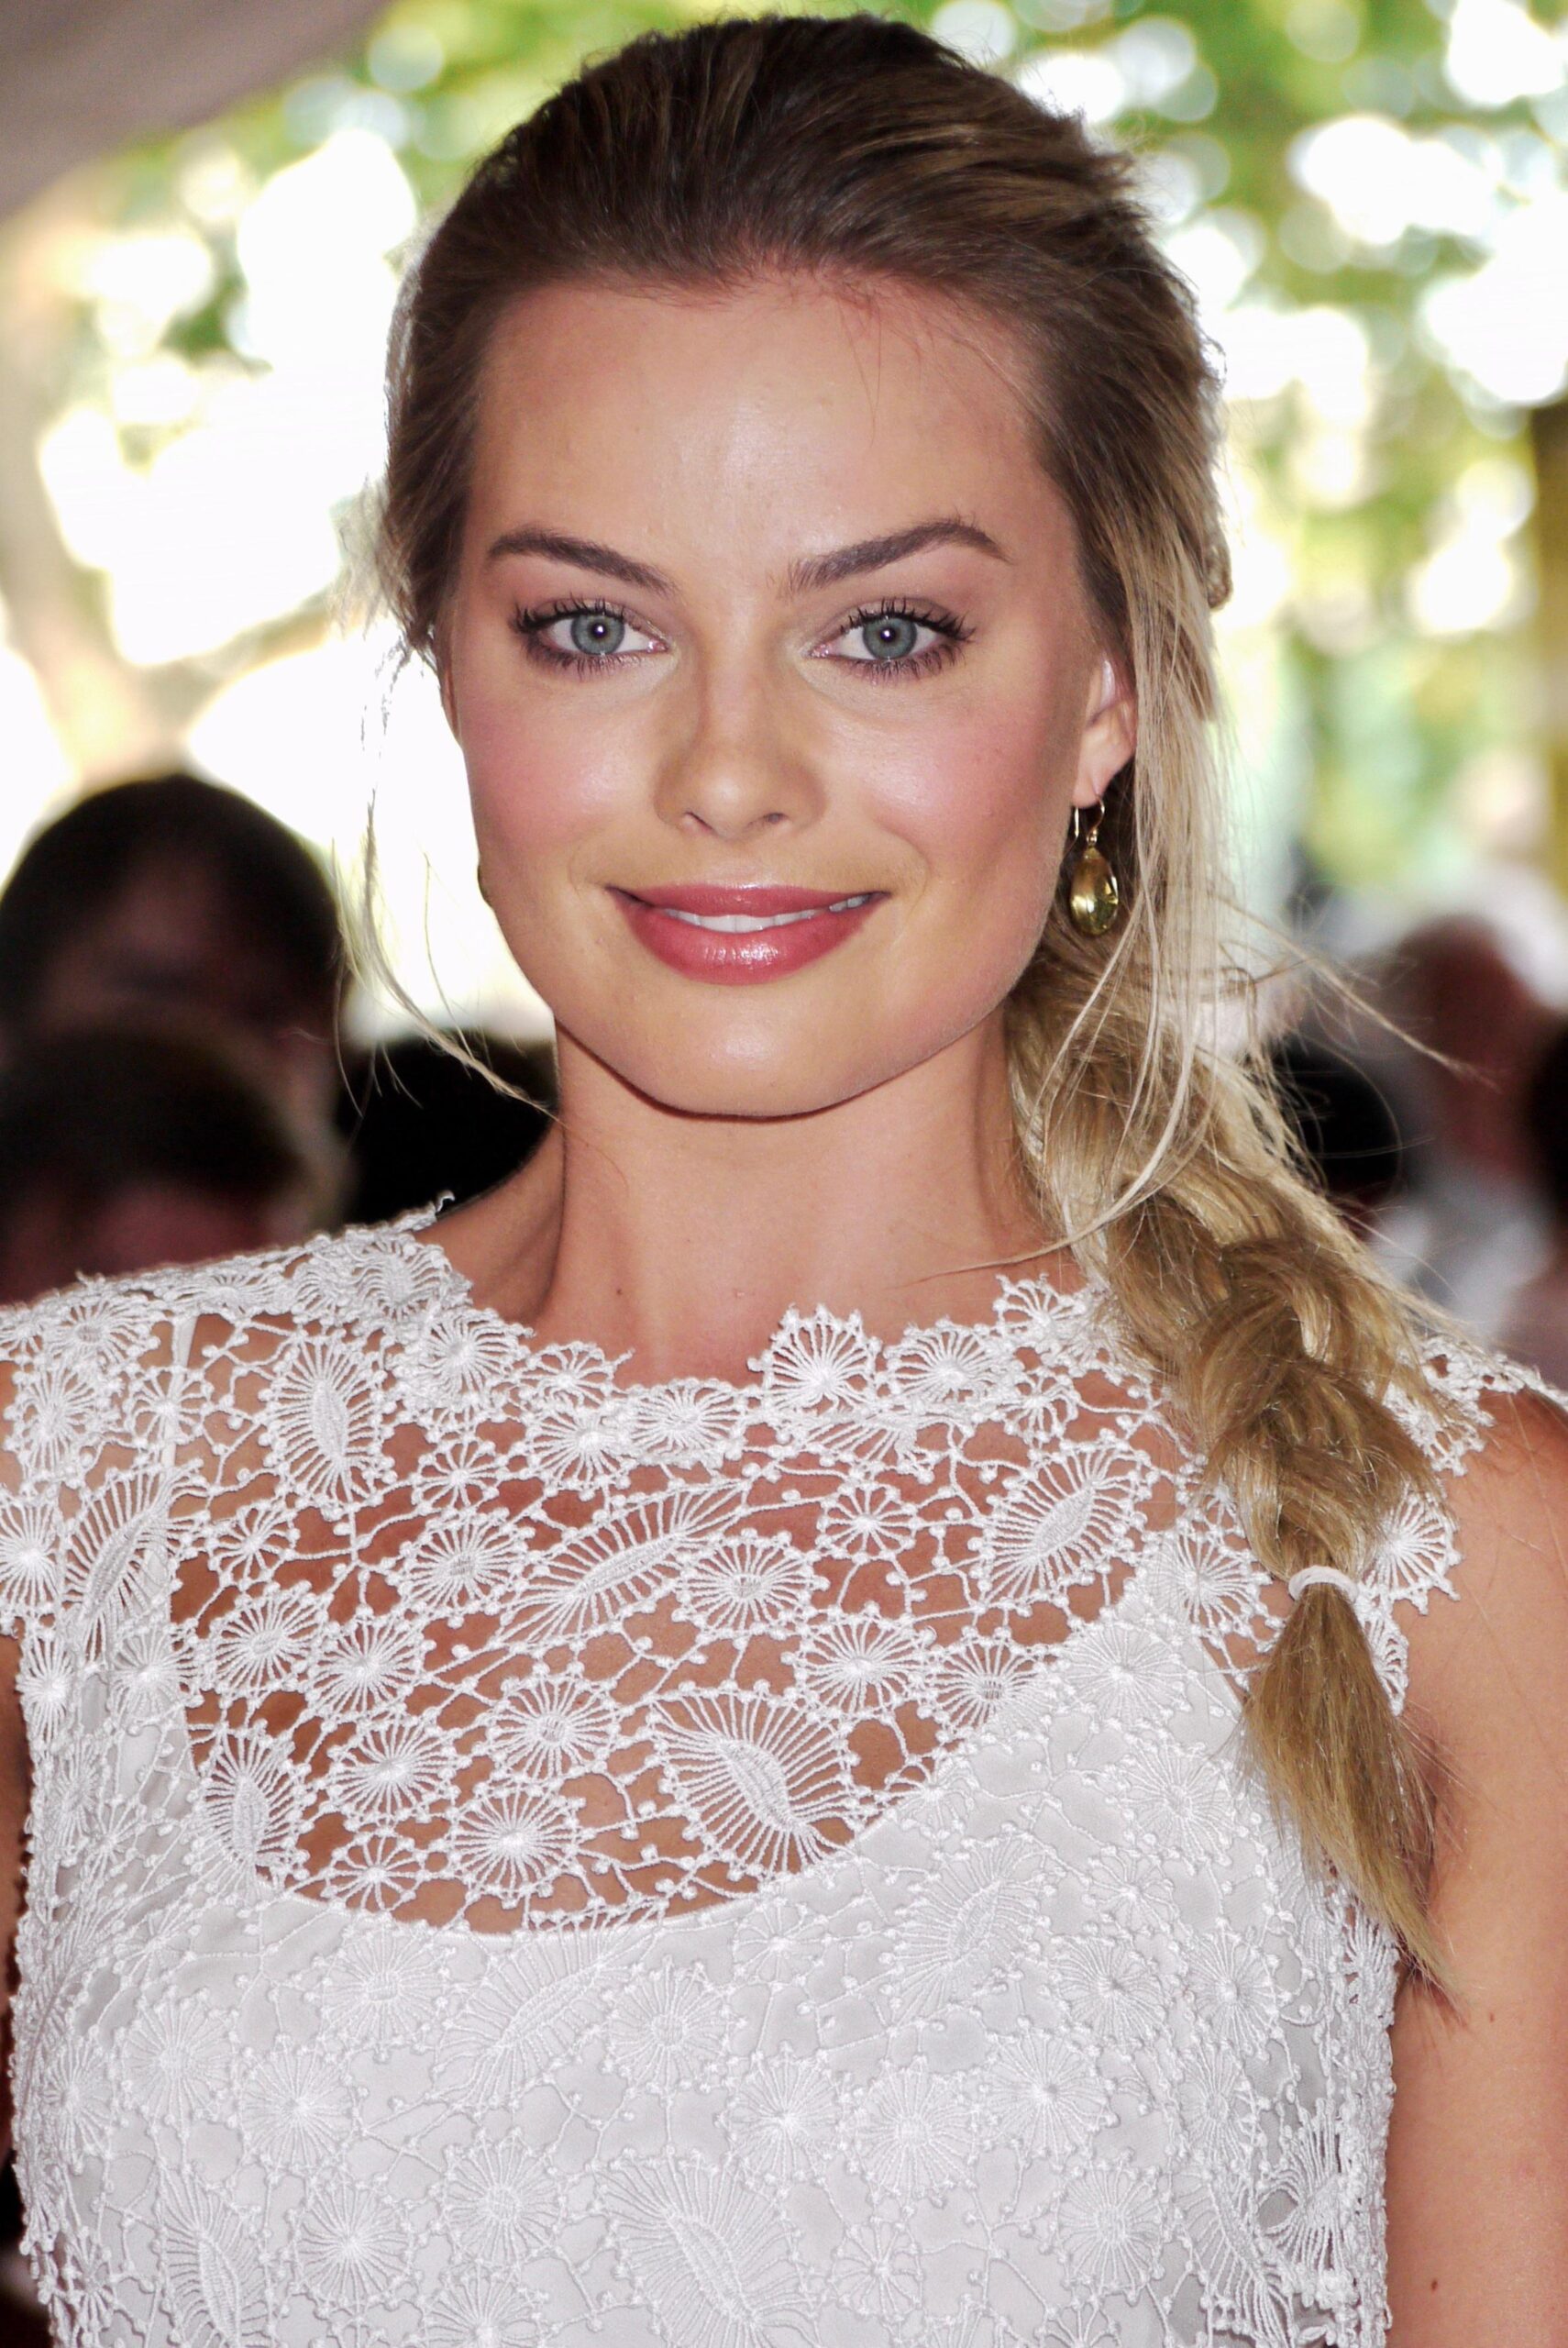 Idk what it is but something about Margot Robbie drives